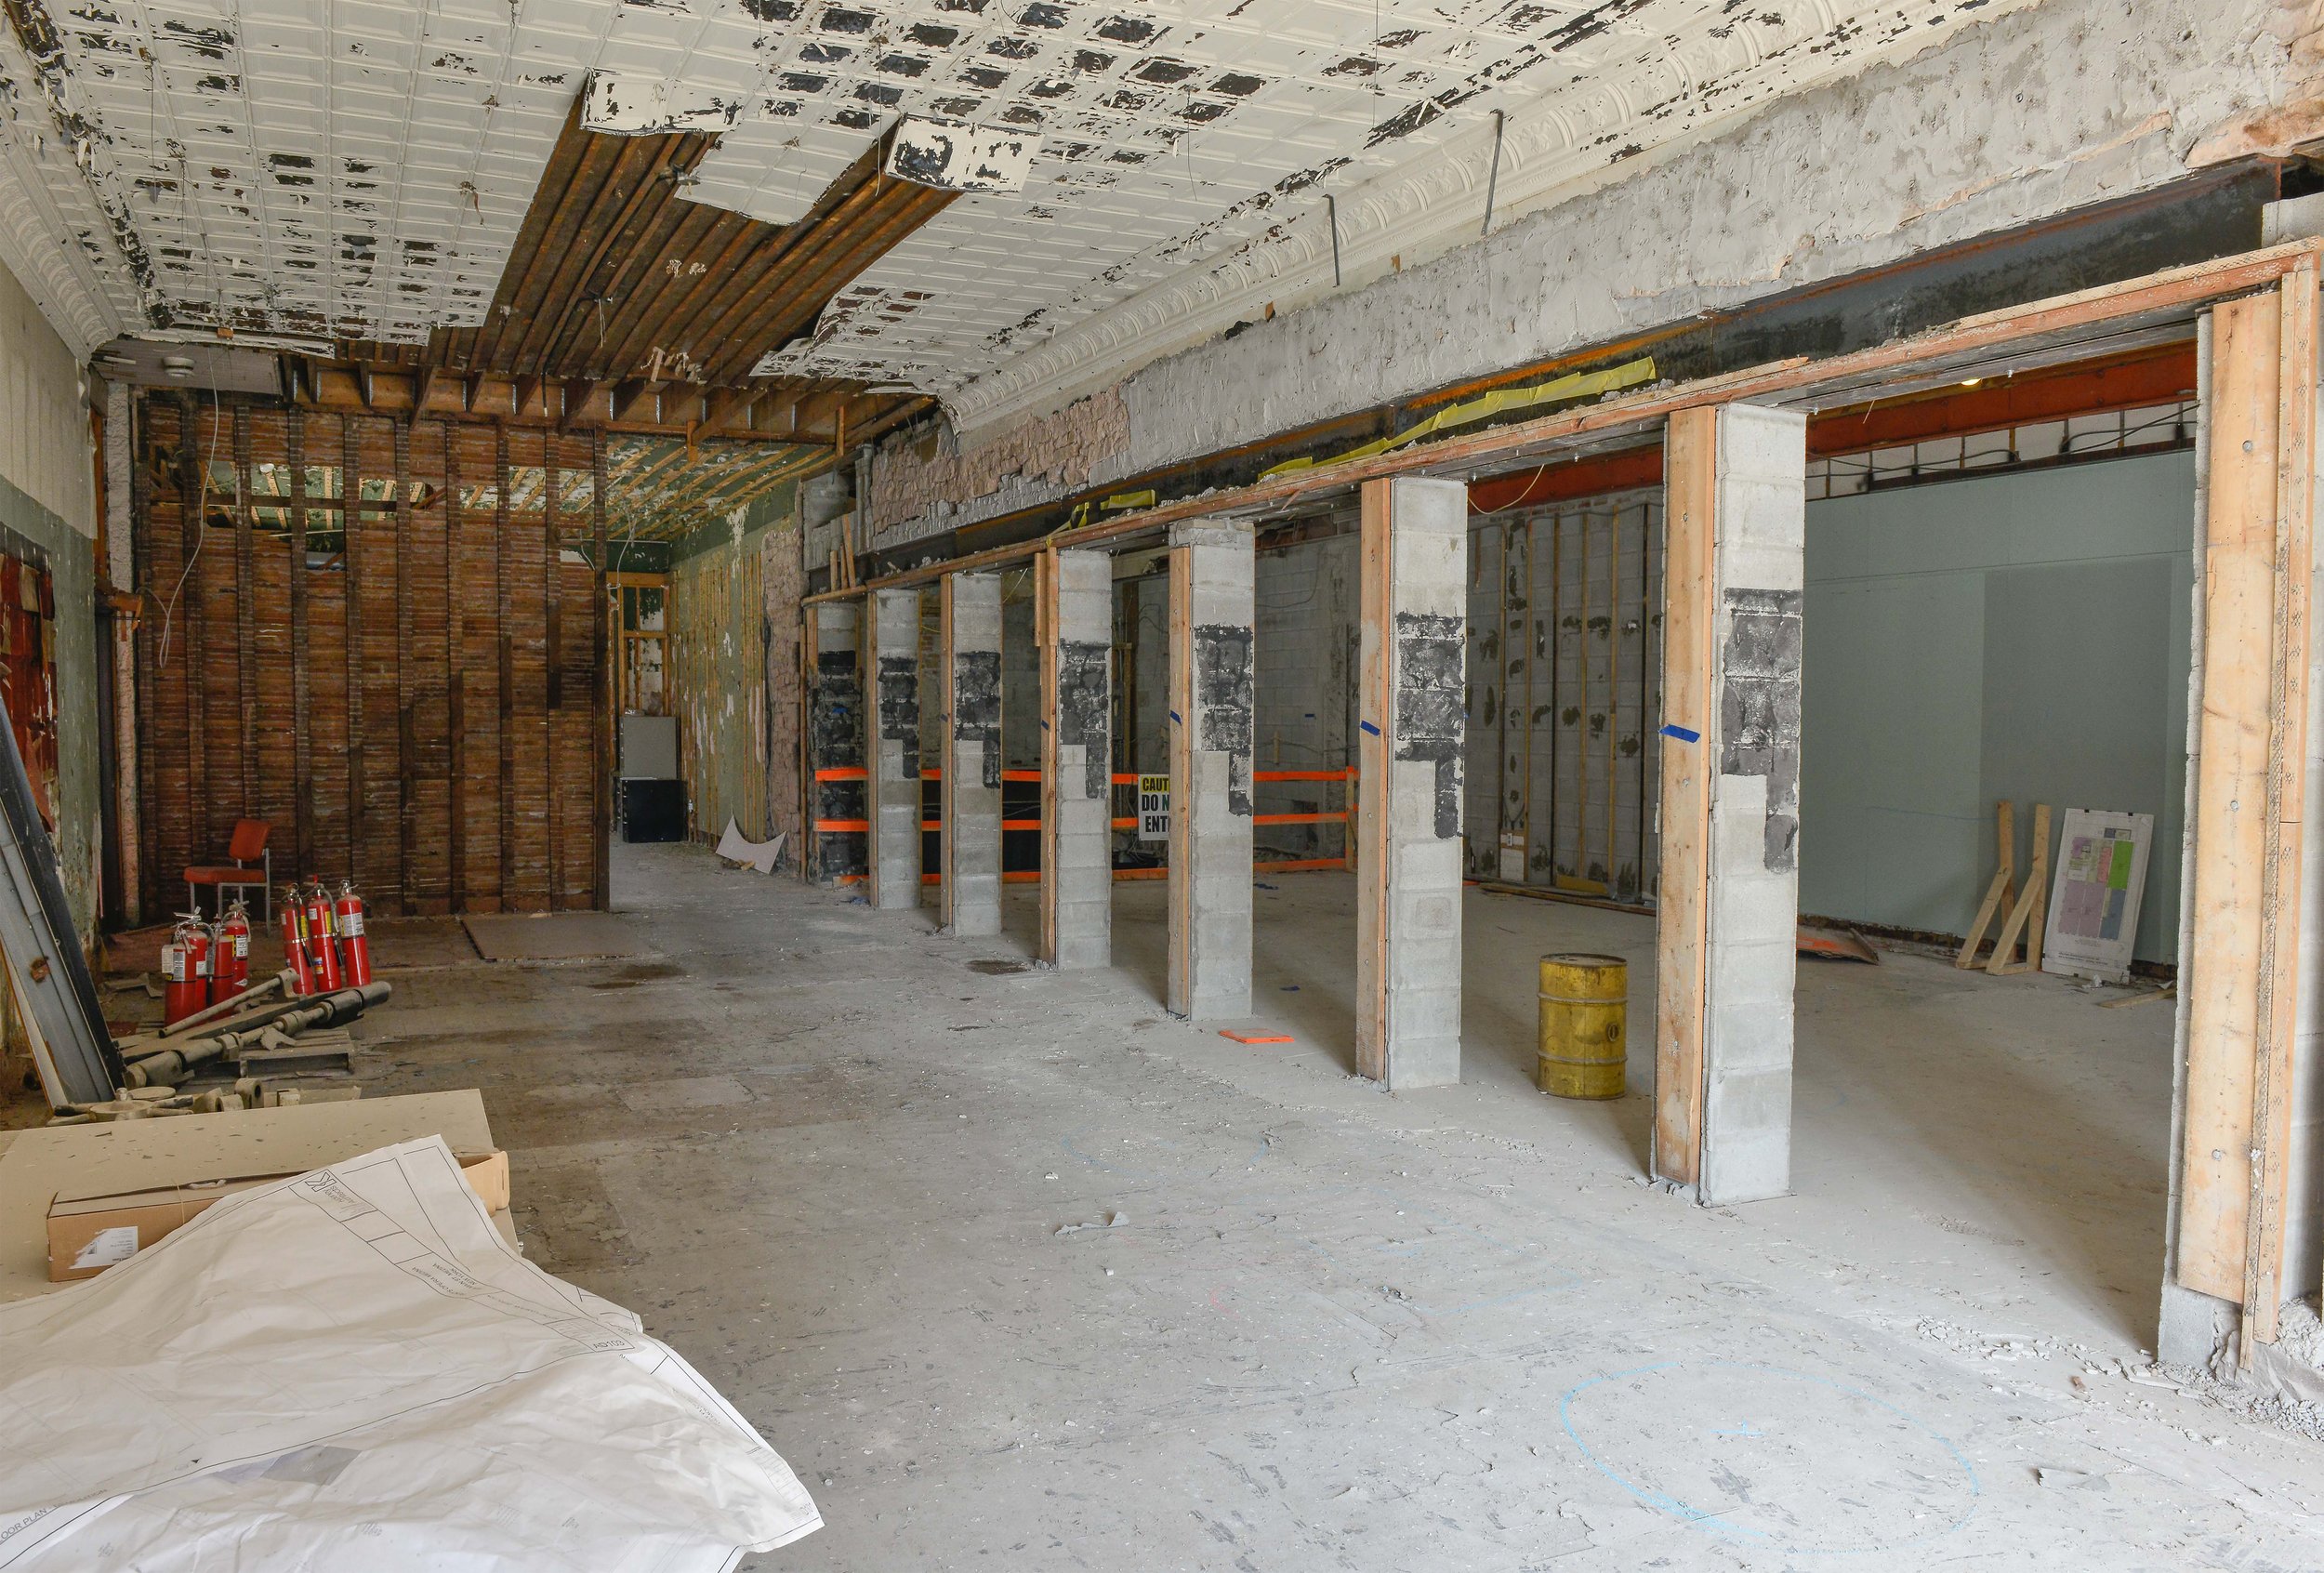 Interior space before renovation. Photo by John Smillie